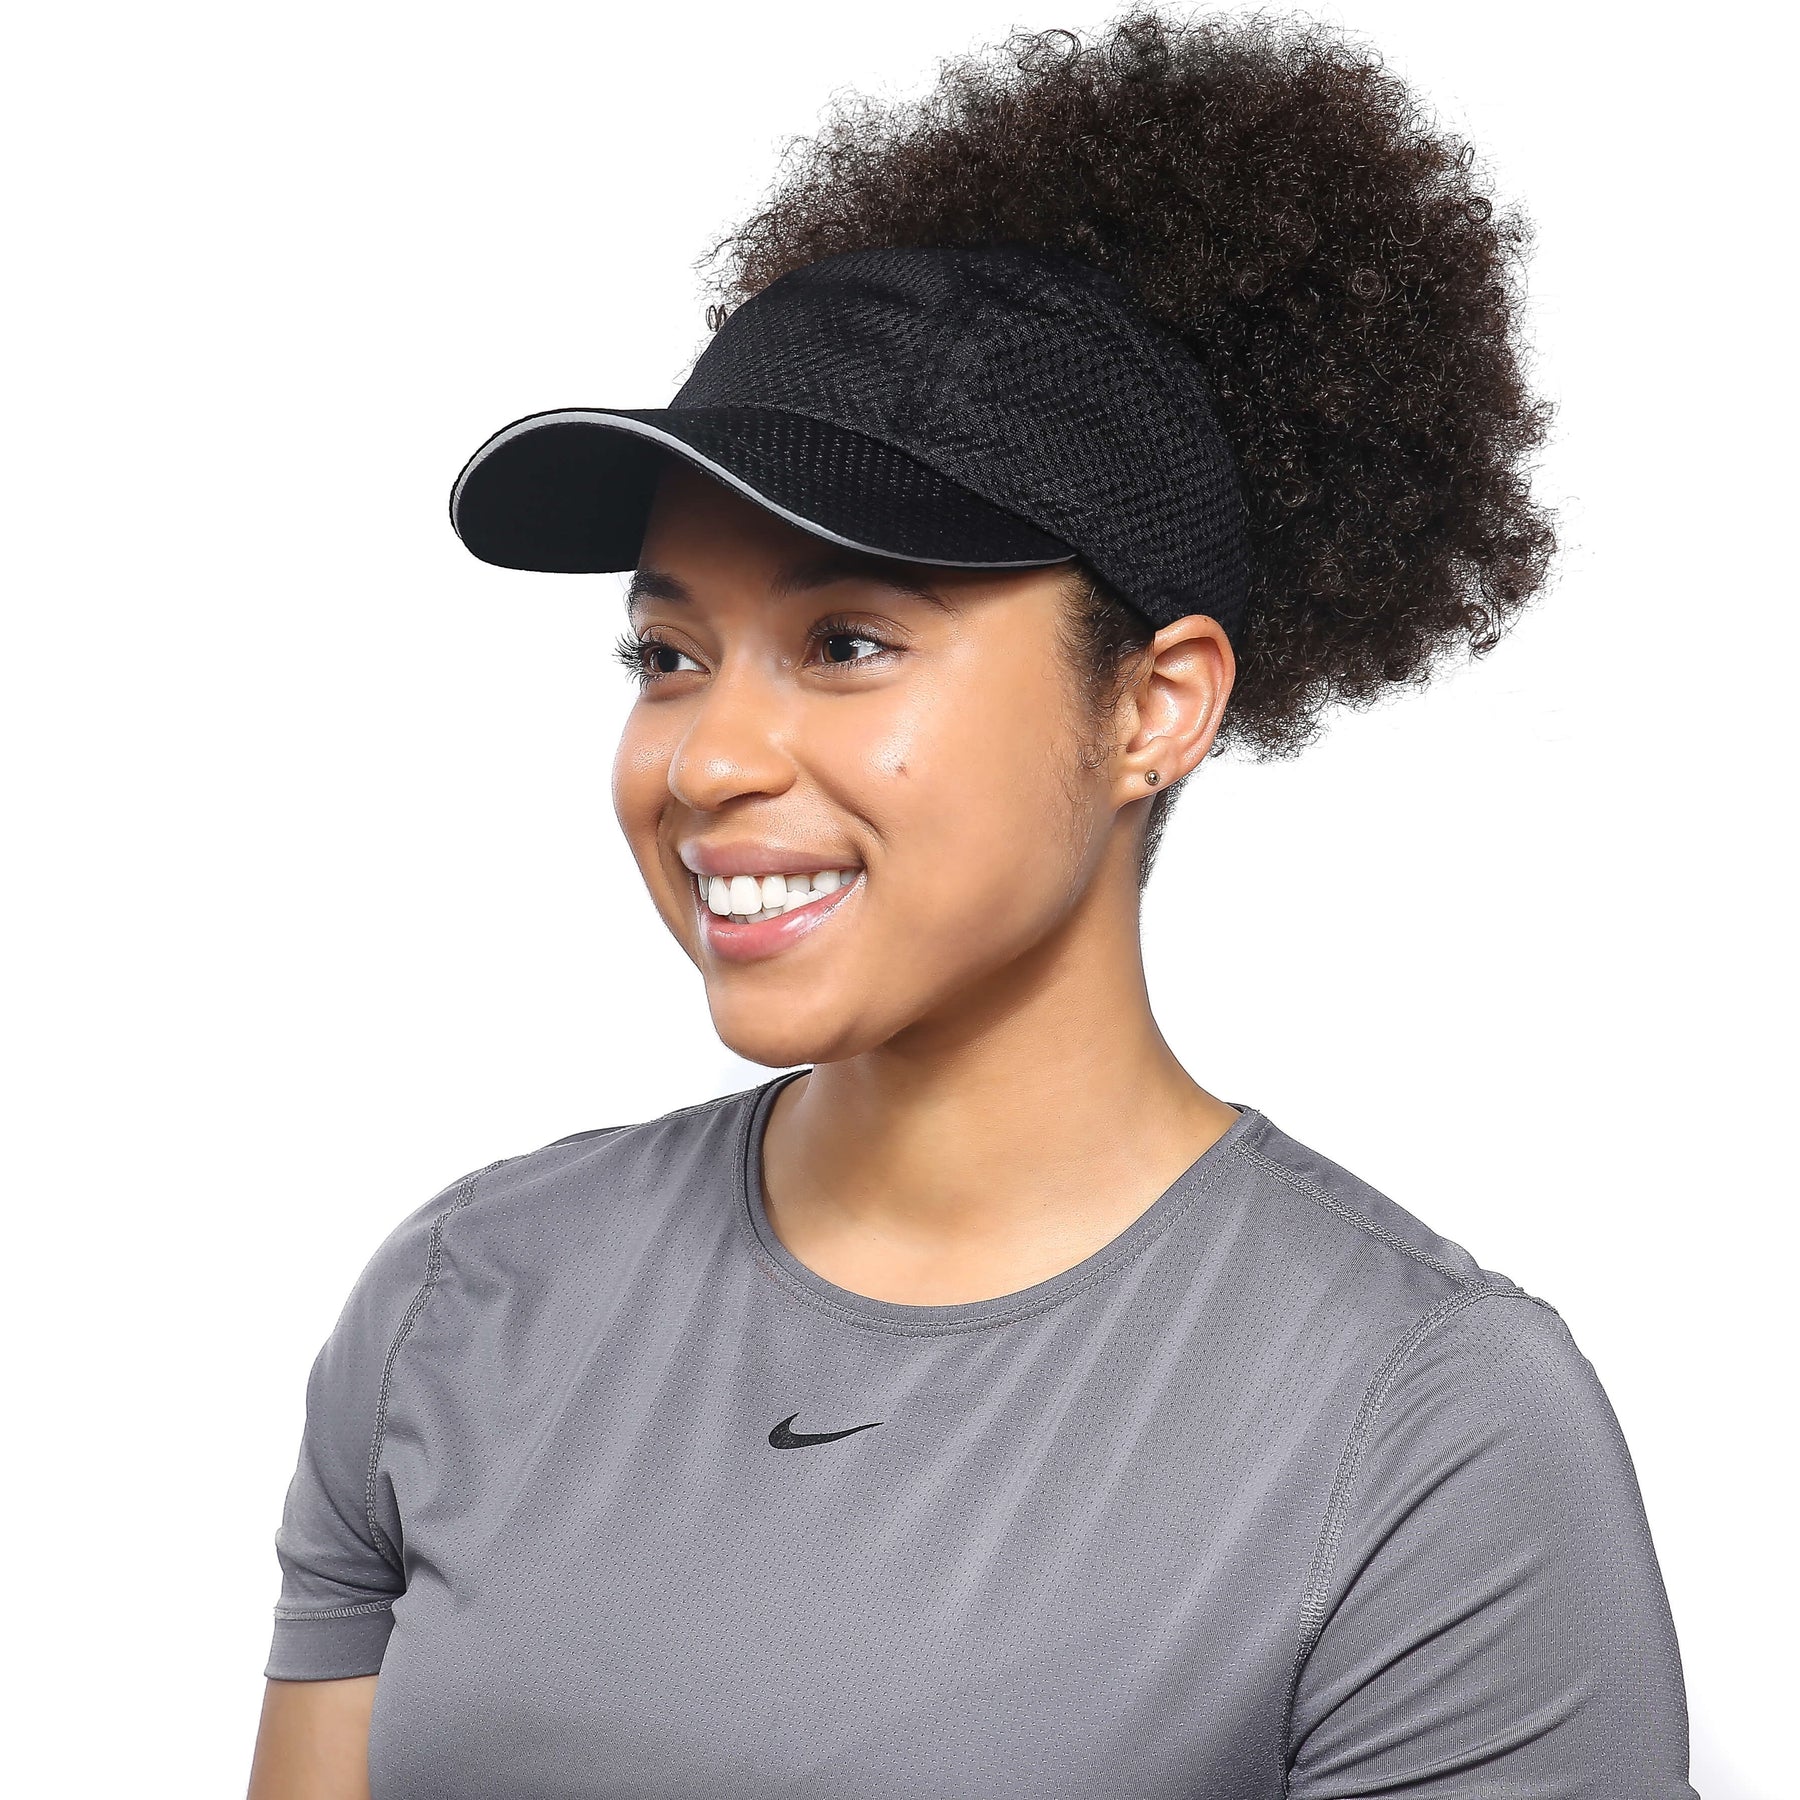 Satin Lined for Curly Hair - Backless Sports Hat Black + White by Beautifully Warm